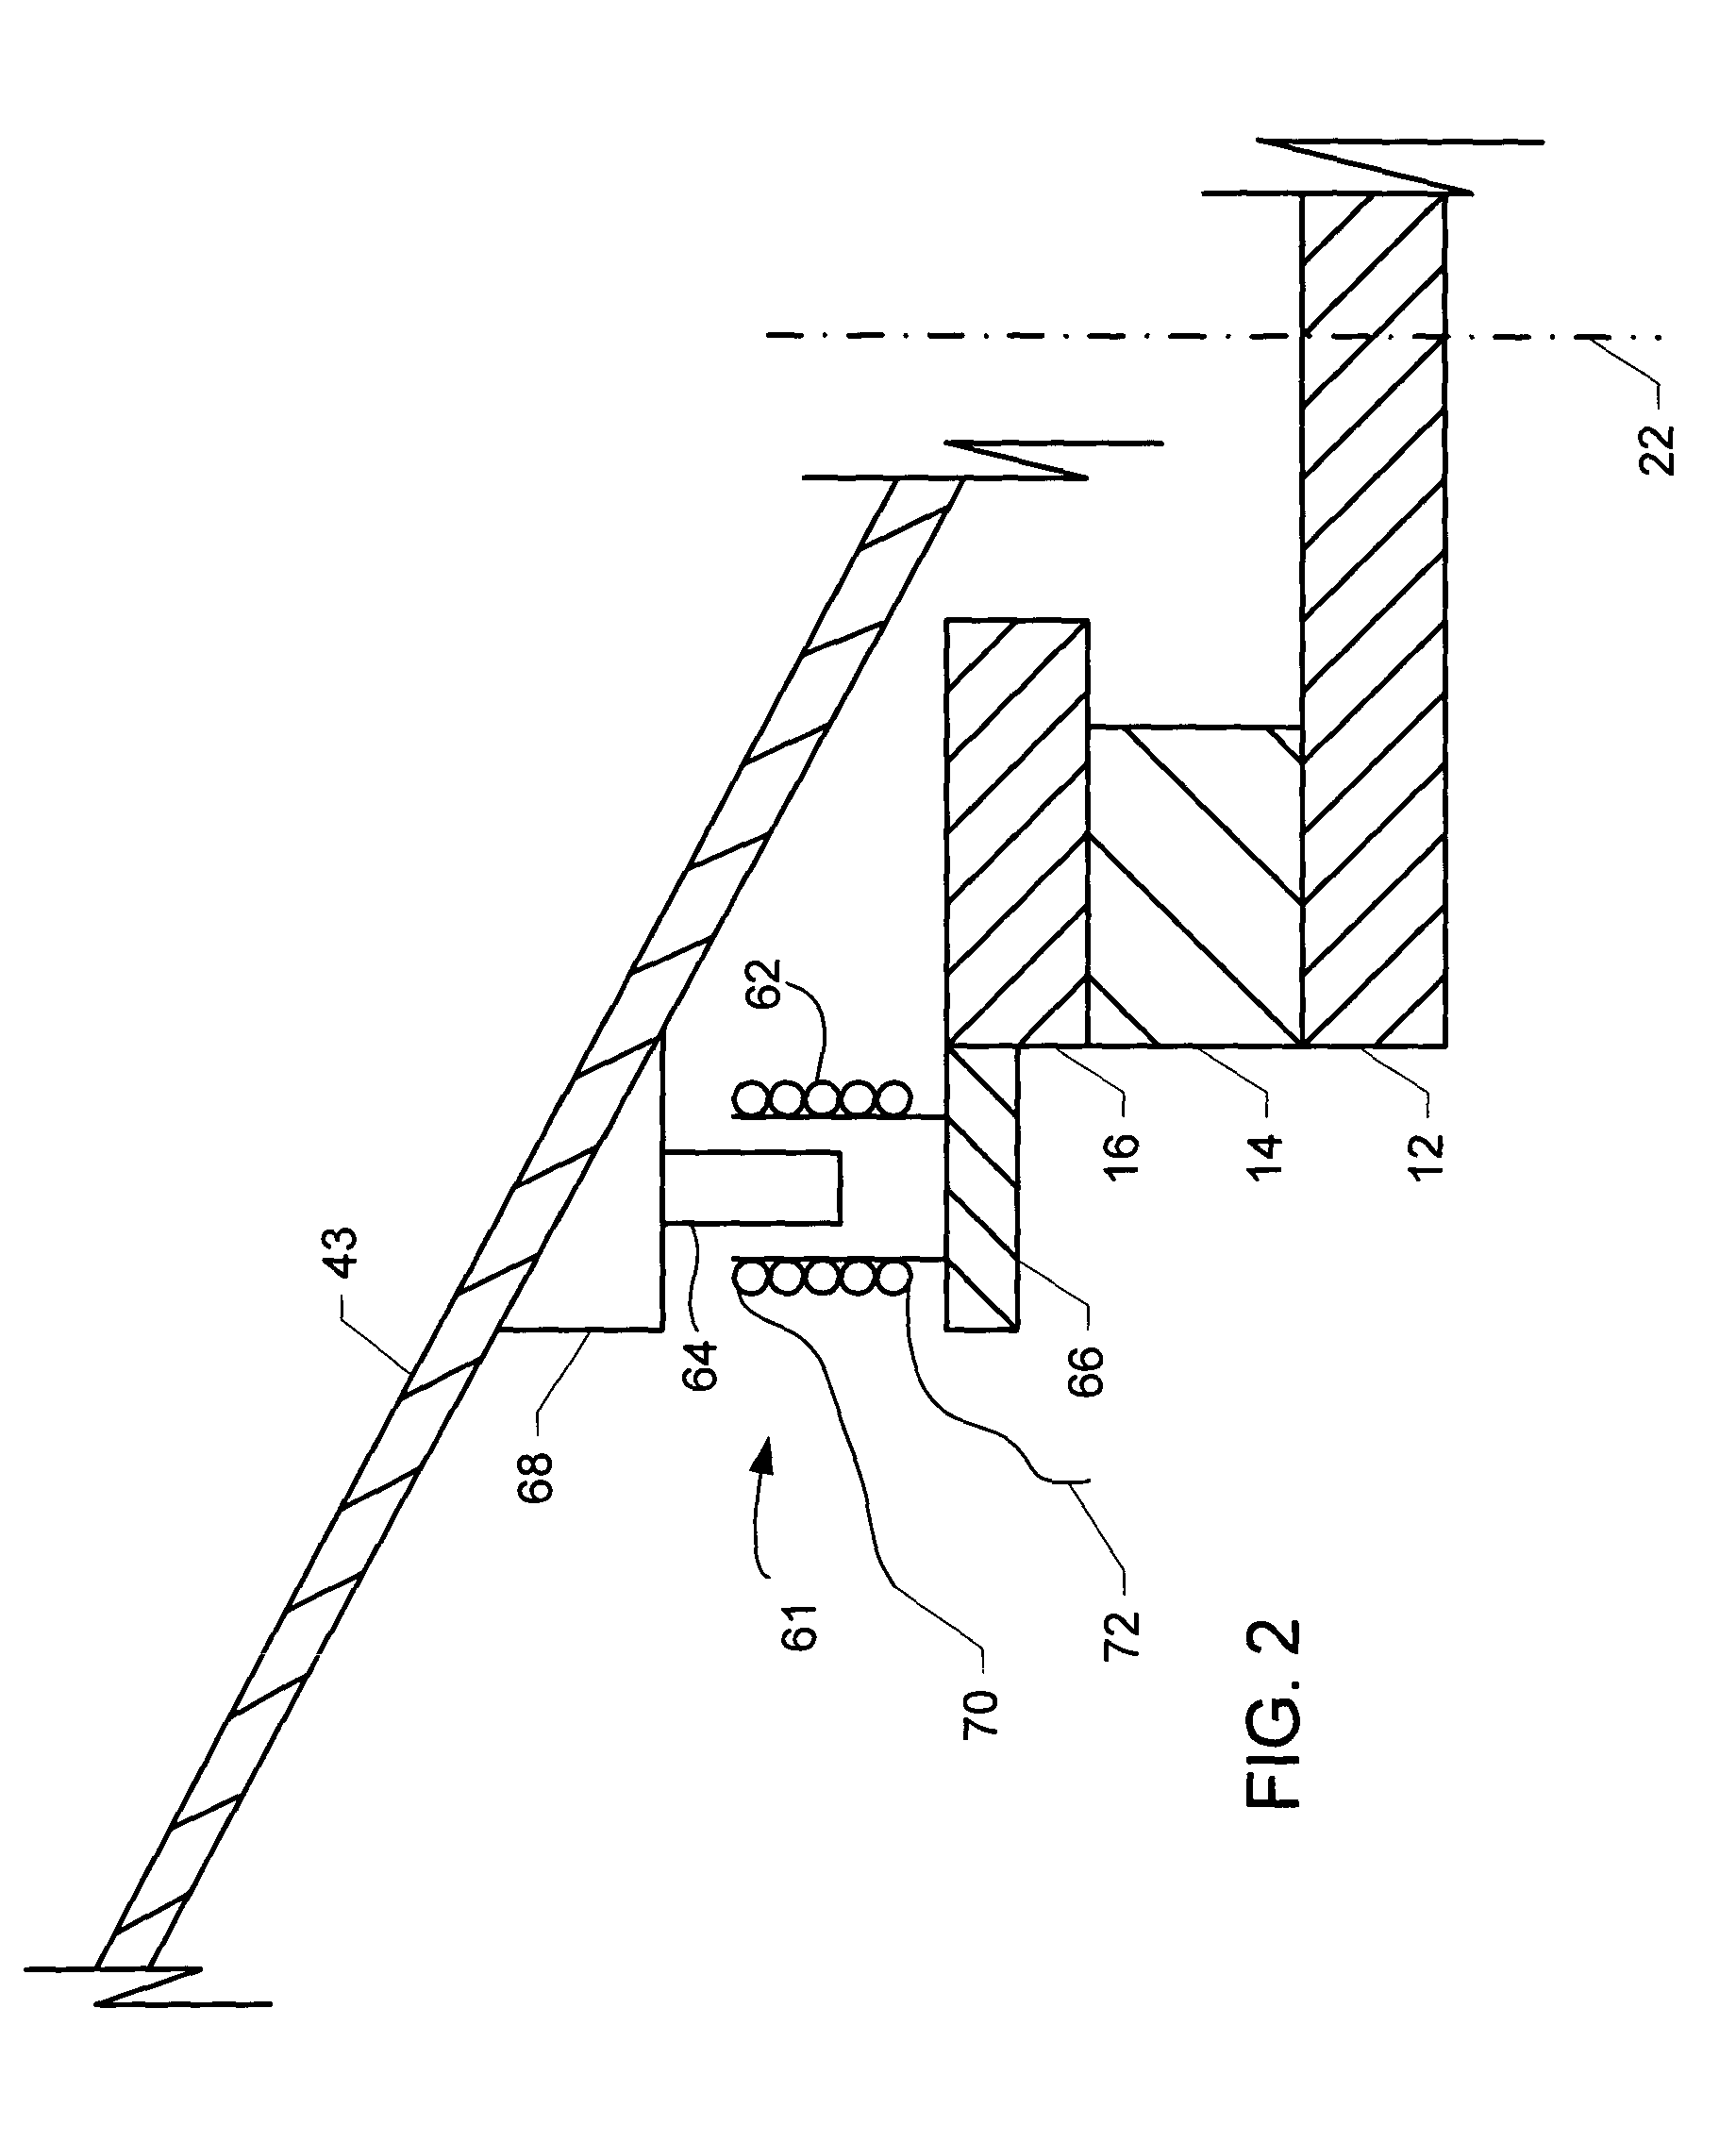 Apparatus and method for monitoring speaker cone displacement in an audio speaker